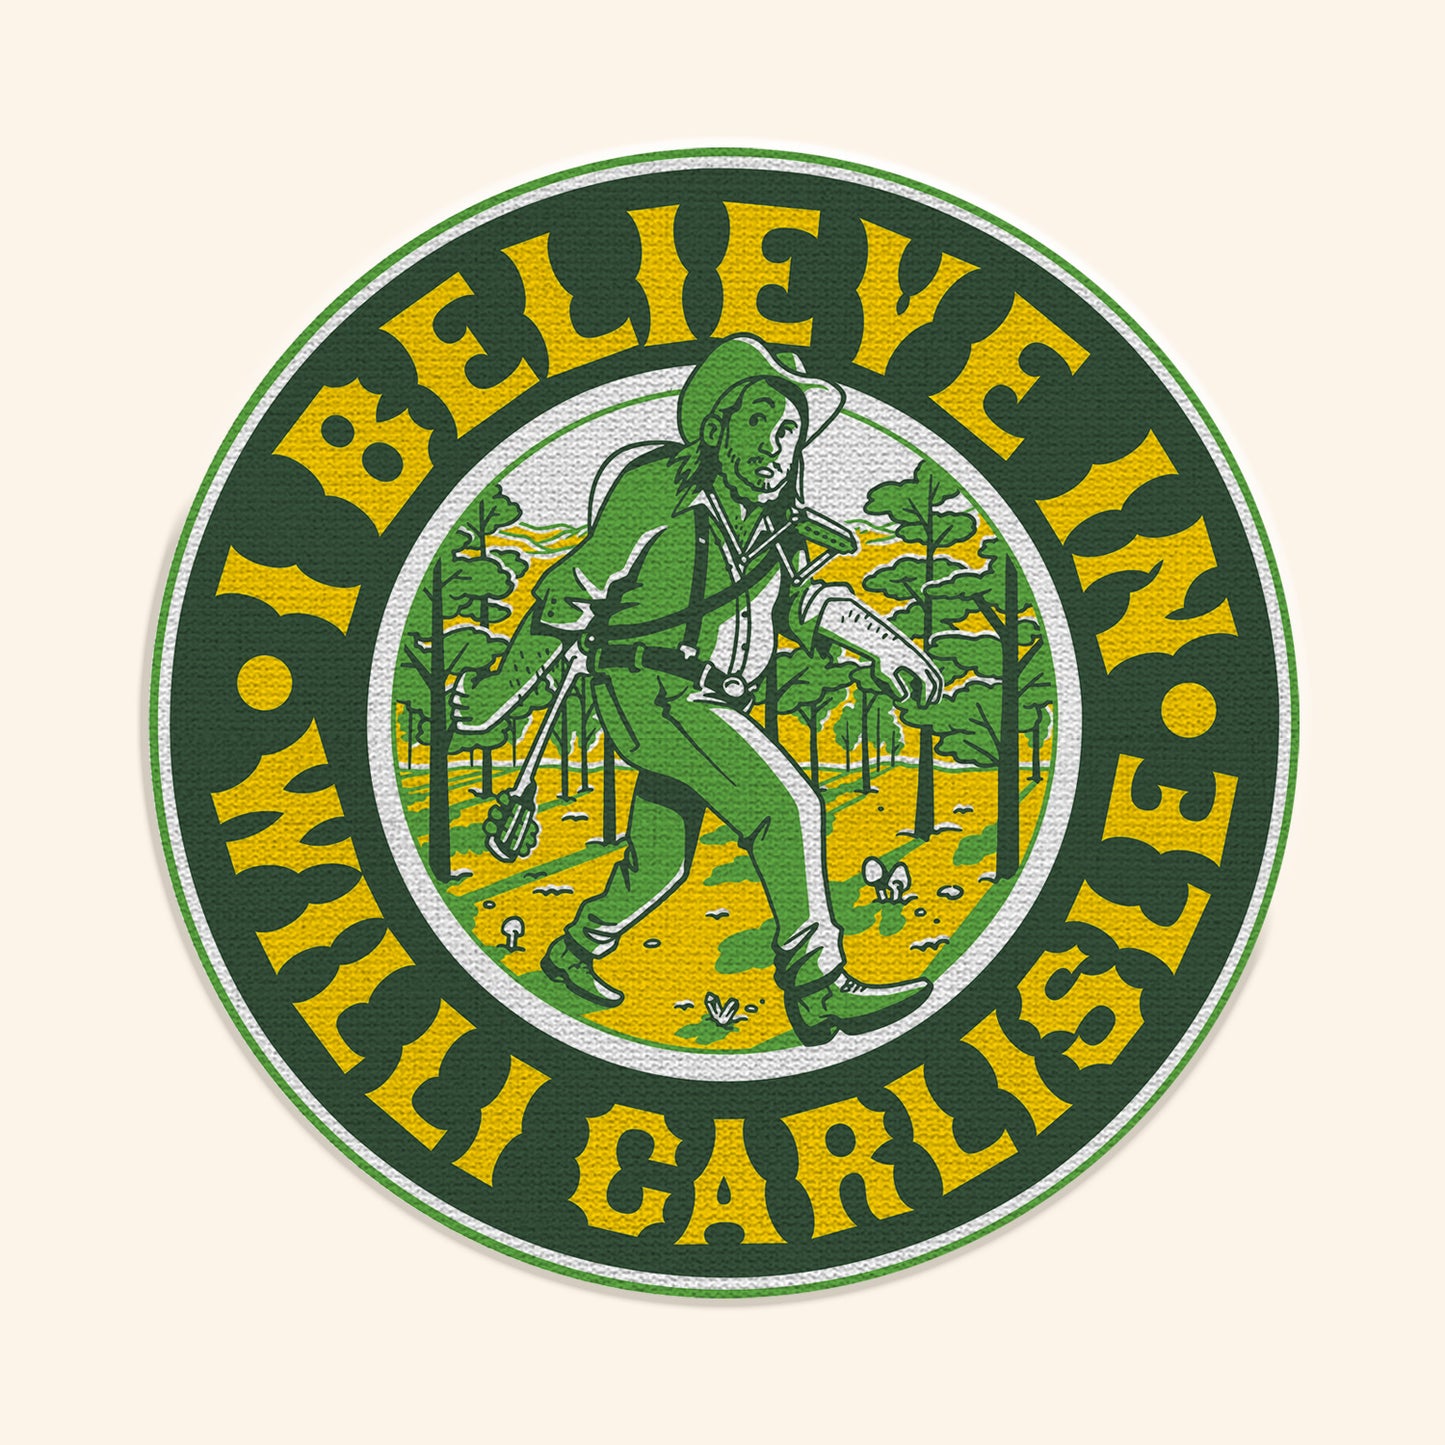 "I Believe in Willi Carlisle" Embroidered Patch